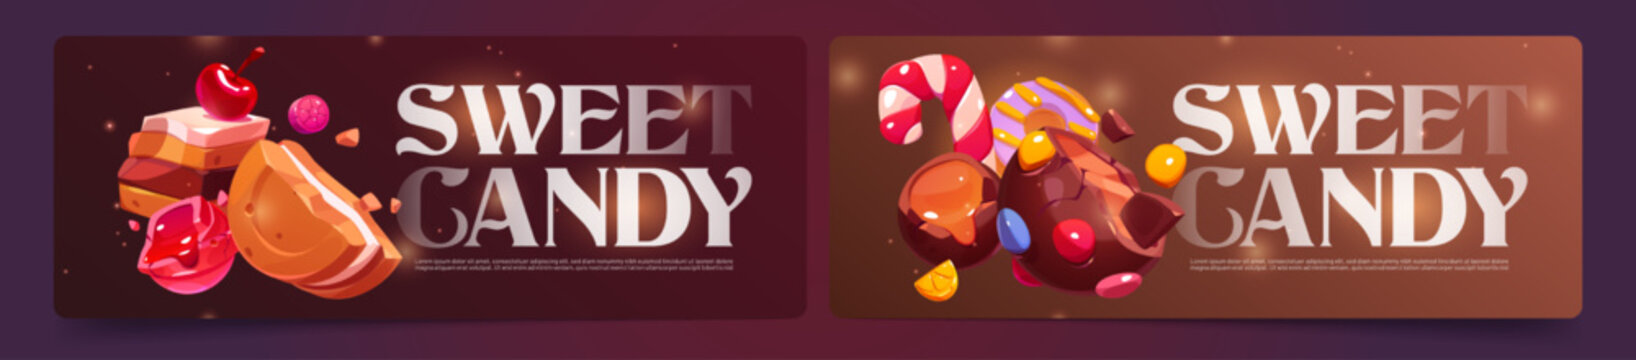 Sweet candy posters with chocolate, caramel drops, bonbon, cake and cookie. Vector banners of confectionery with cartoon illustration of desserts, sweet food and candies